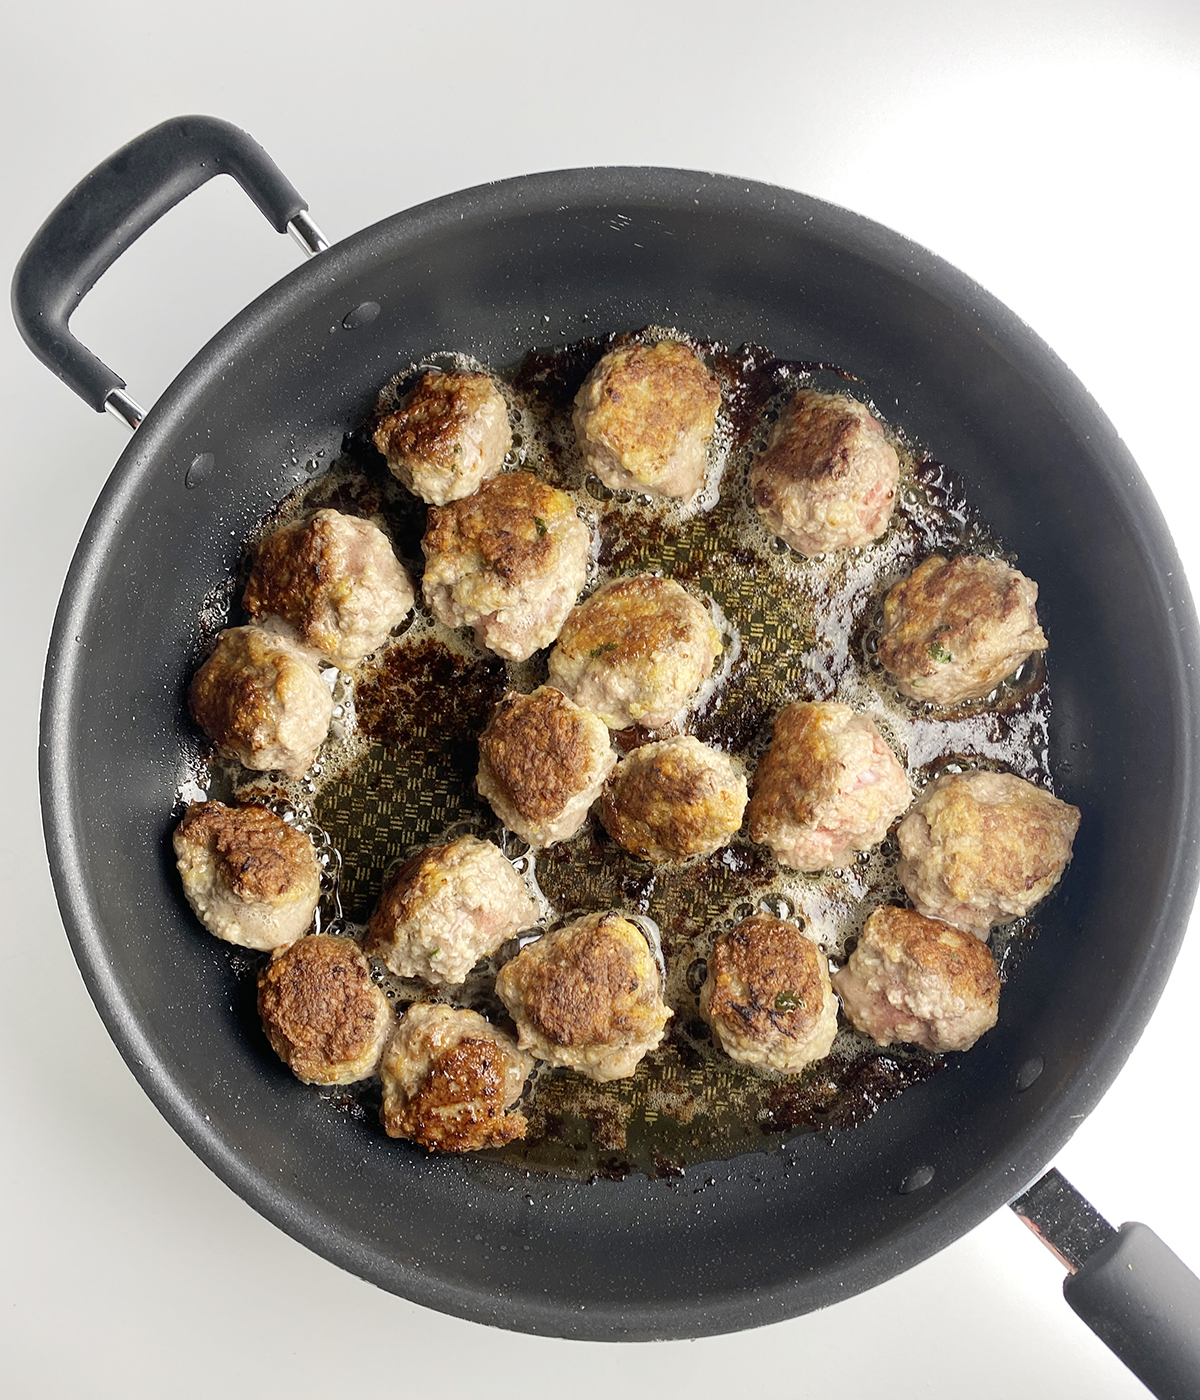 Cooked meatballs in a skillet.